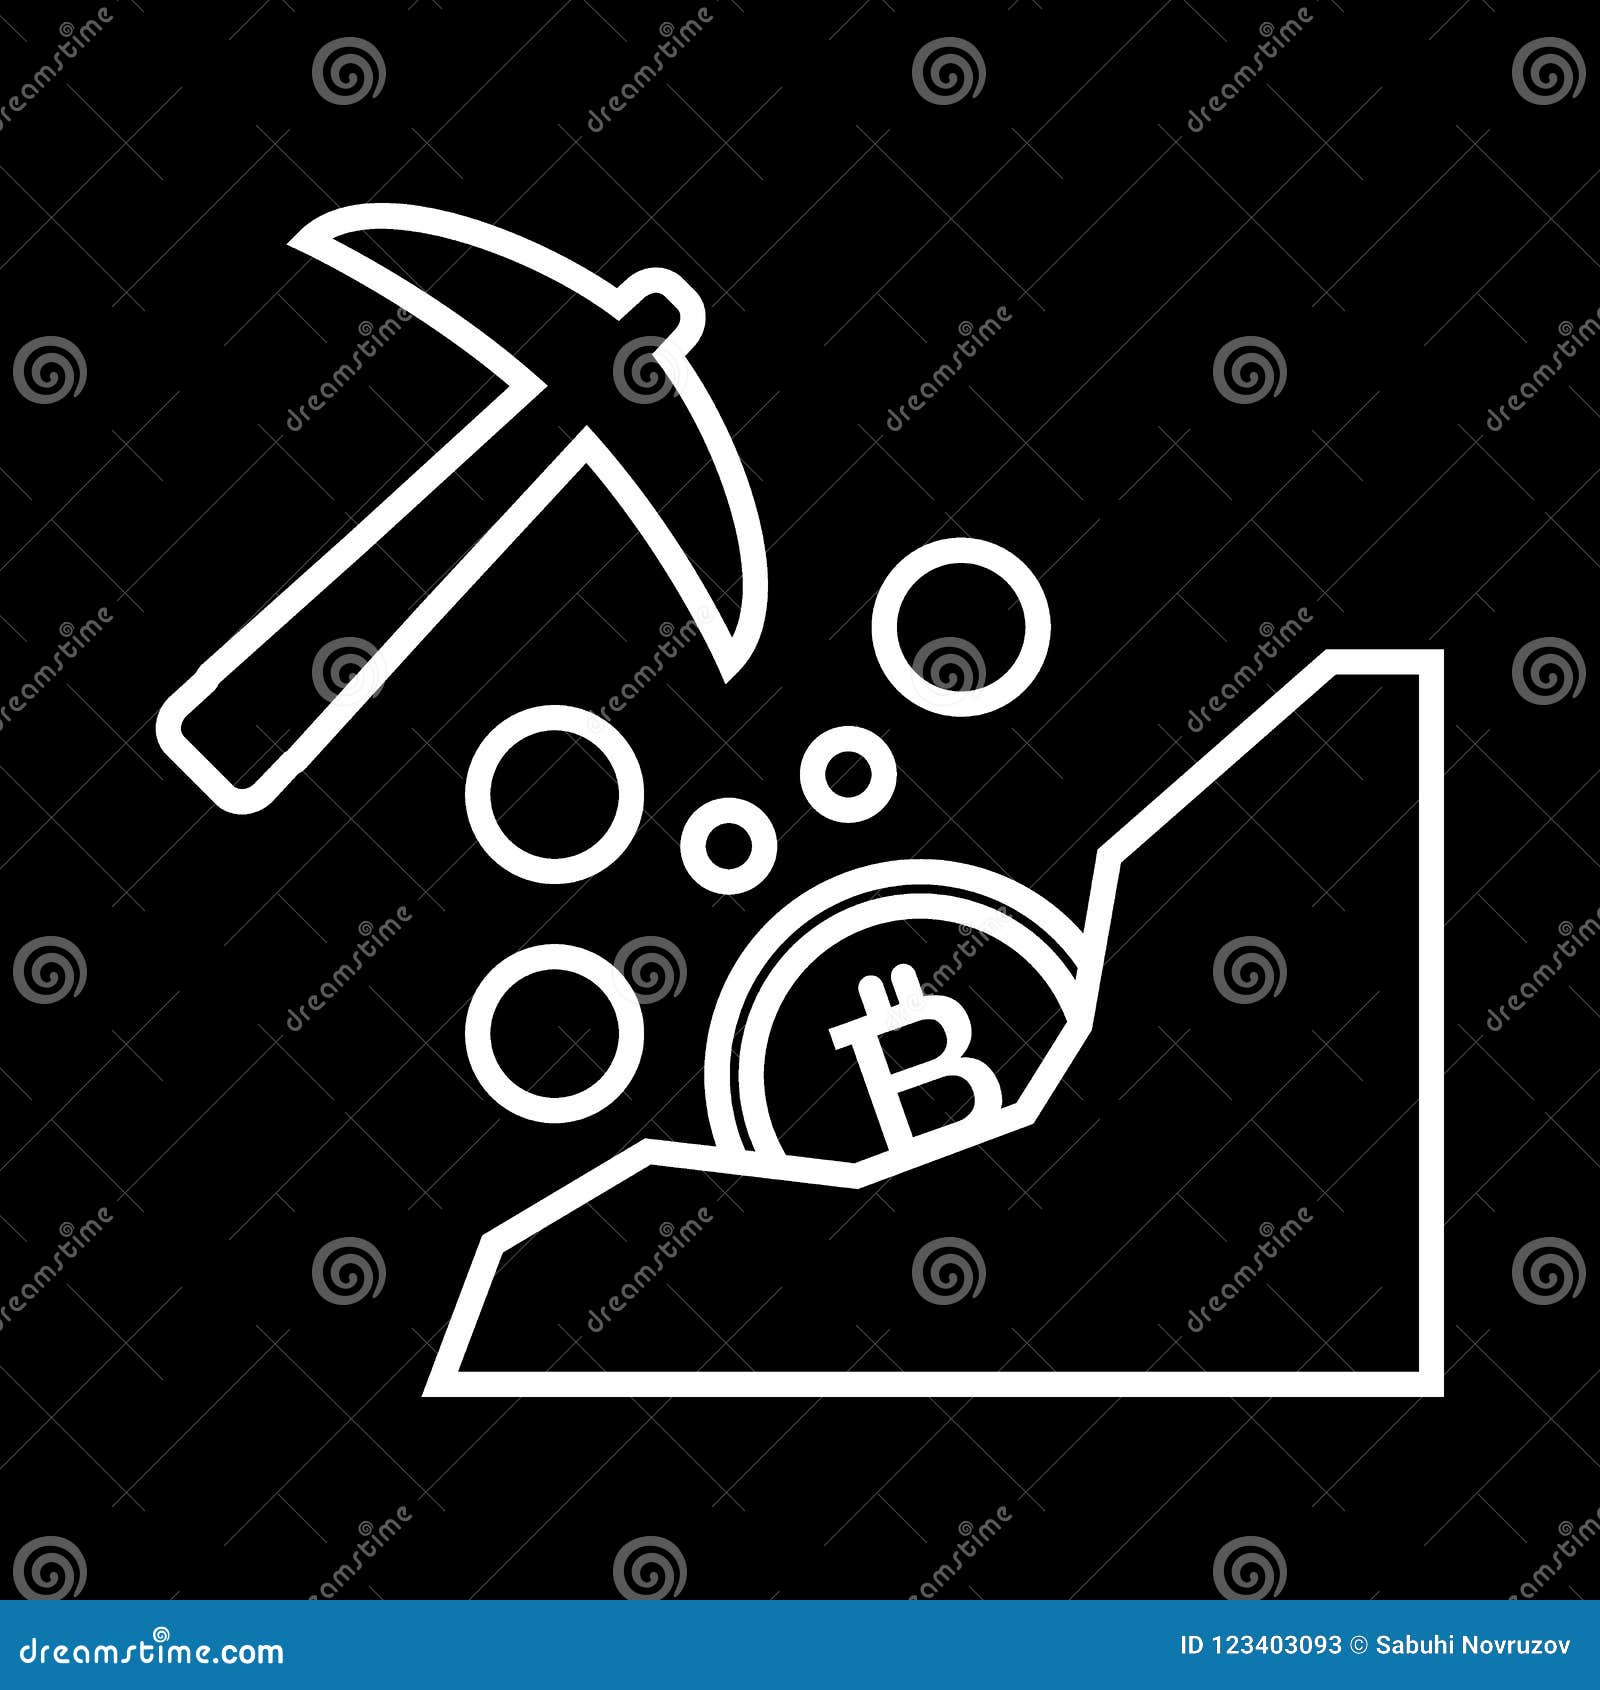 Extraction Bitcoin Line Icon. Vector Illustration Isolated On Black. Outline Style Design ...